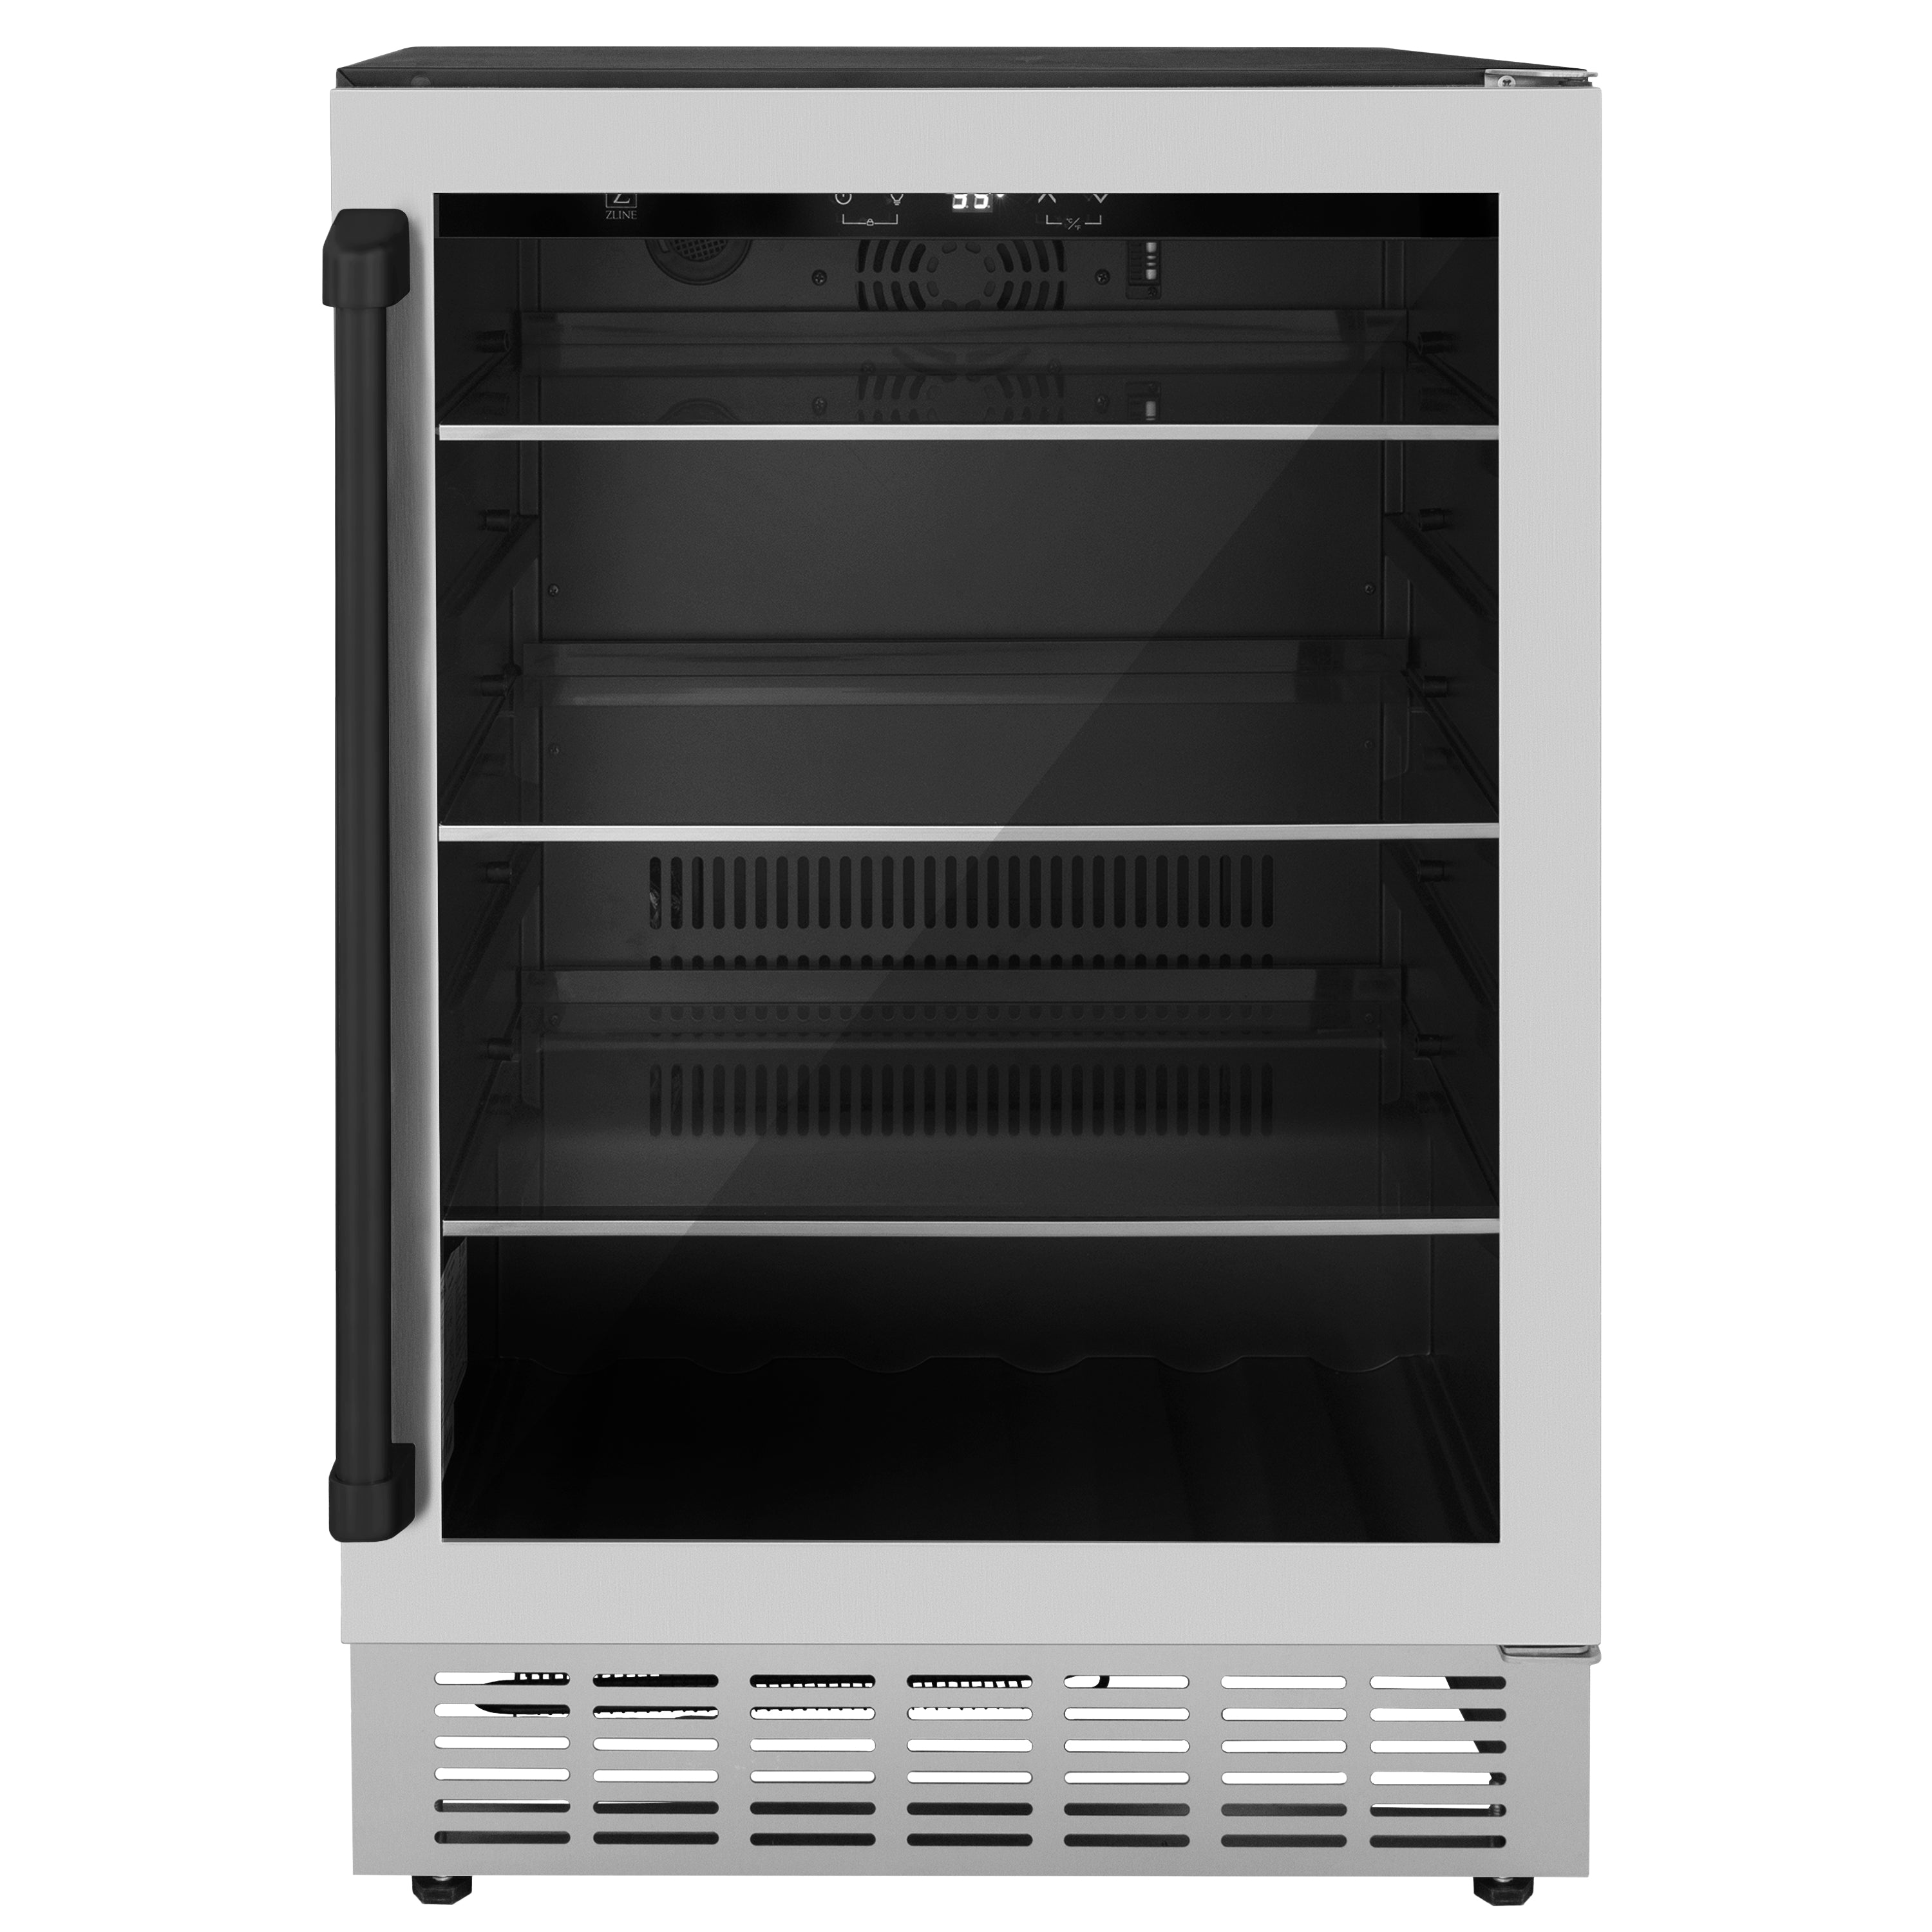 ZLINE 24" Monument Autograph Edition 154 Can Beverage Fridge in Stainless Steel with Matte Black Accents (RBVZ-US-24-MB)